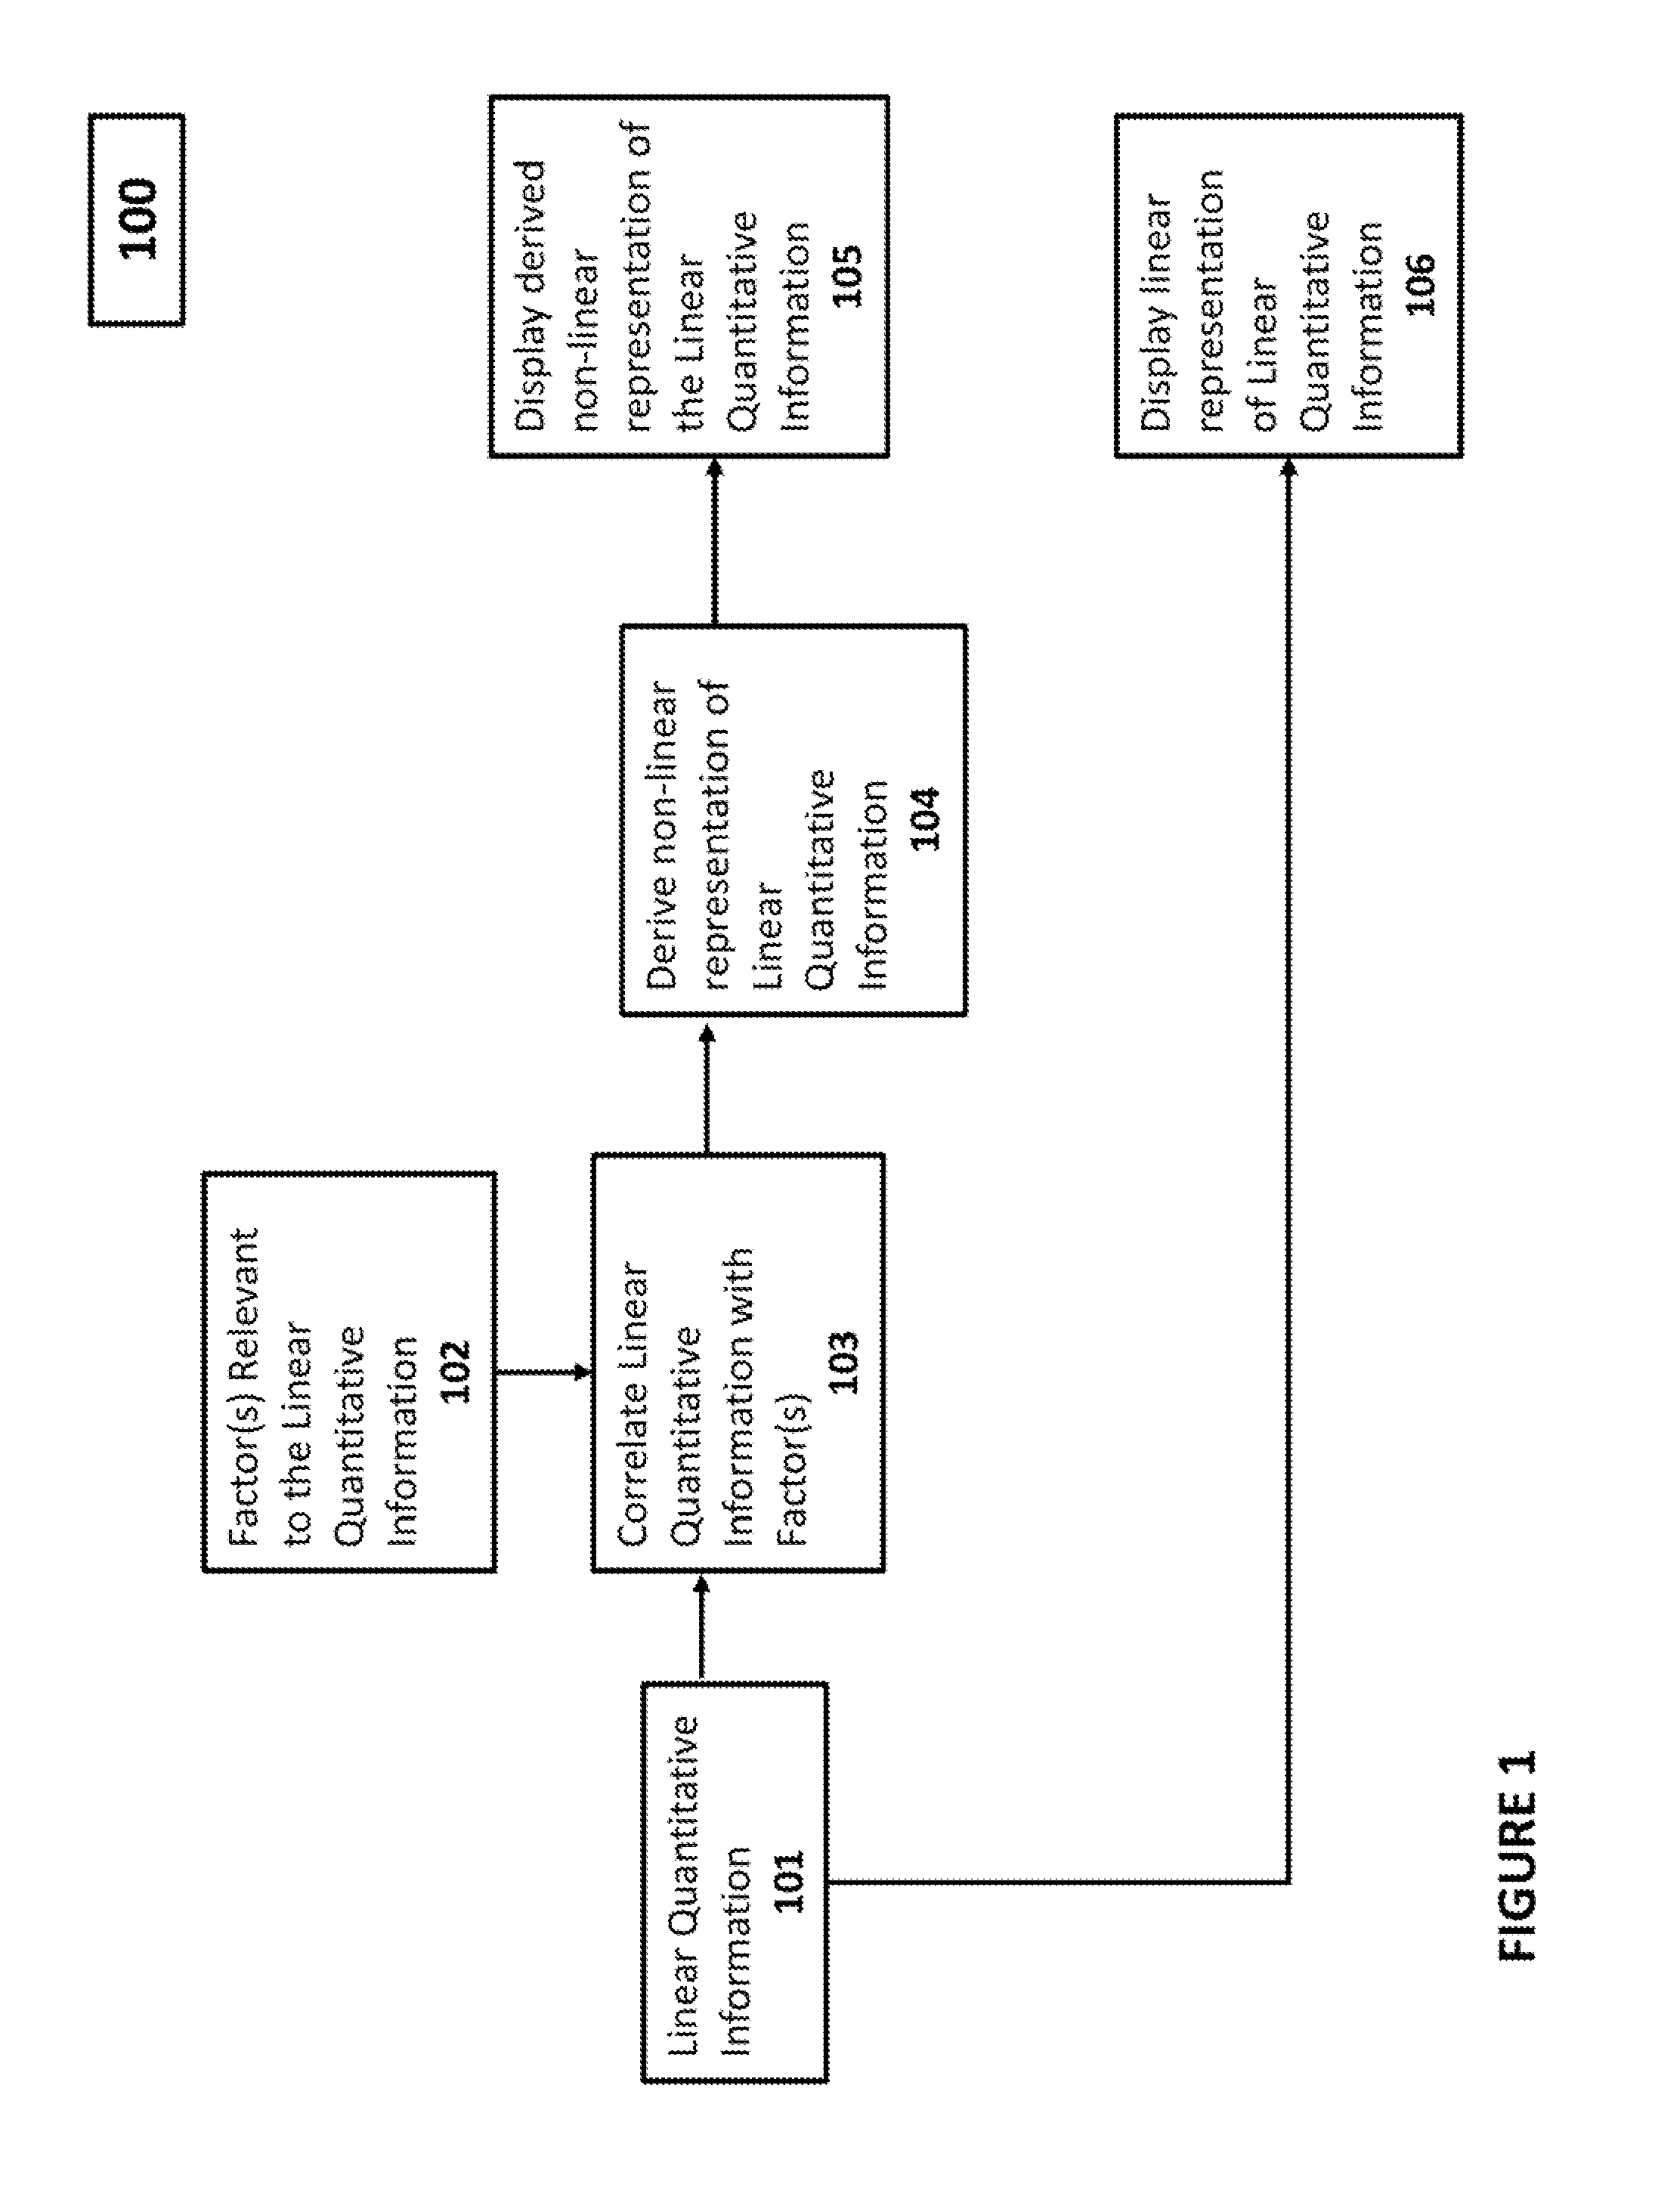 Methods of displaying information to a user, and systems and devices for use in practicing the same